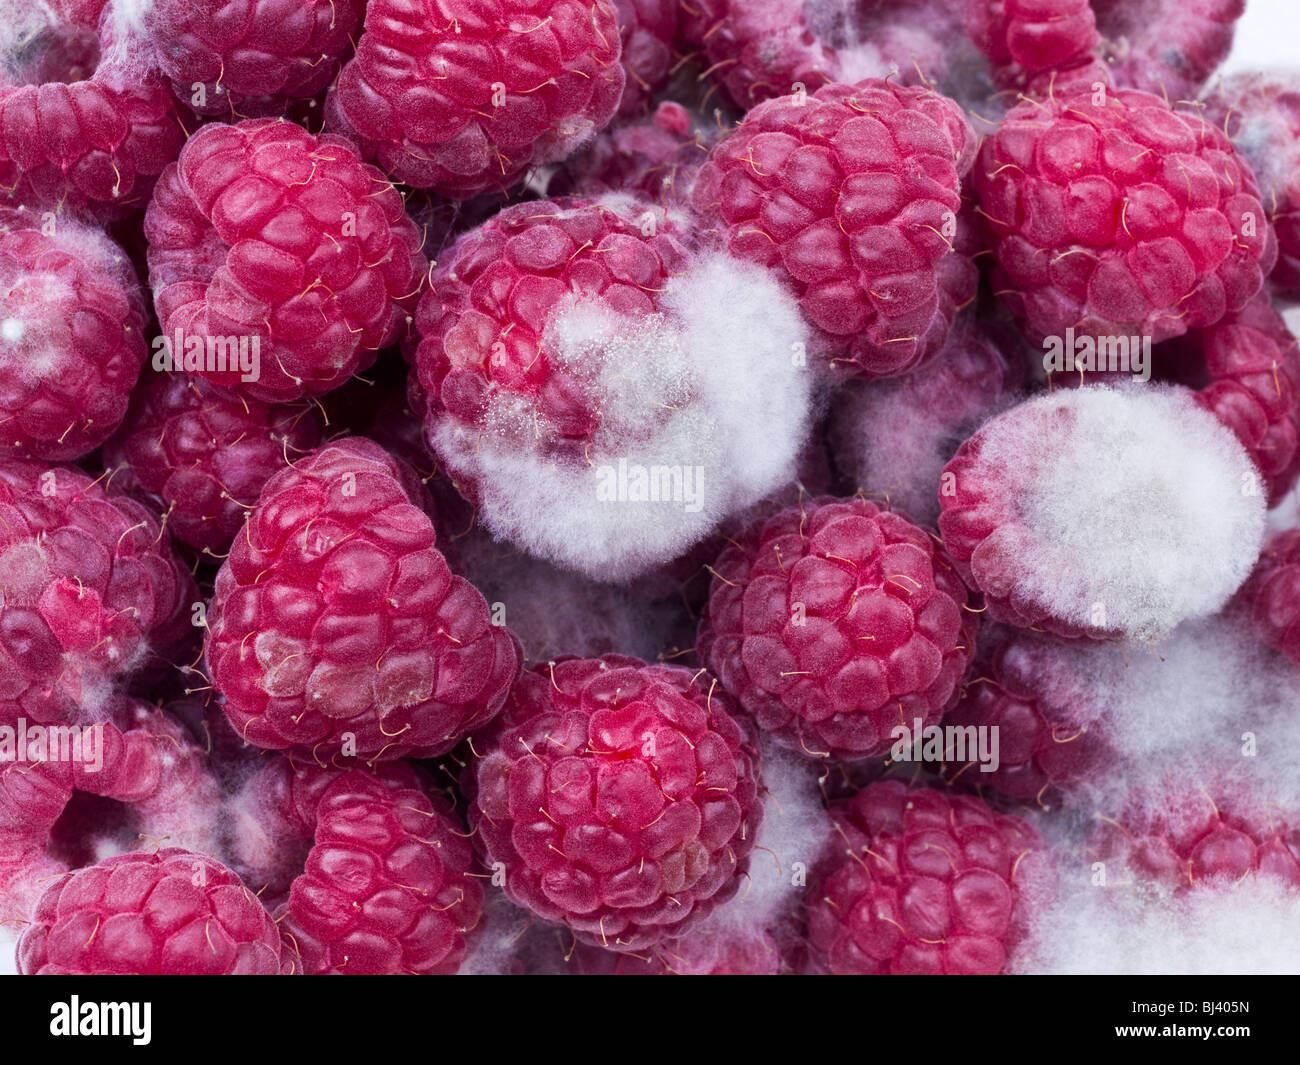 Mouldy raspberries - France. Stock Photo